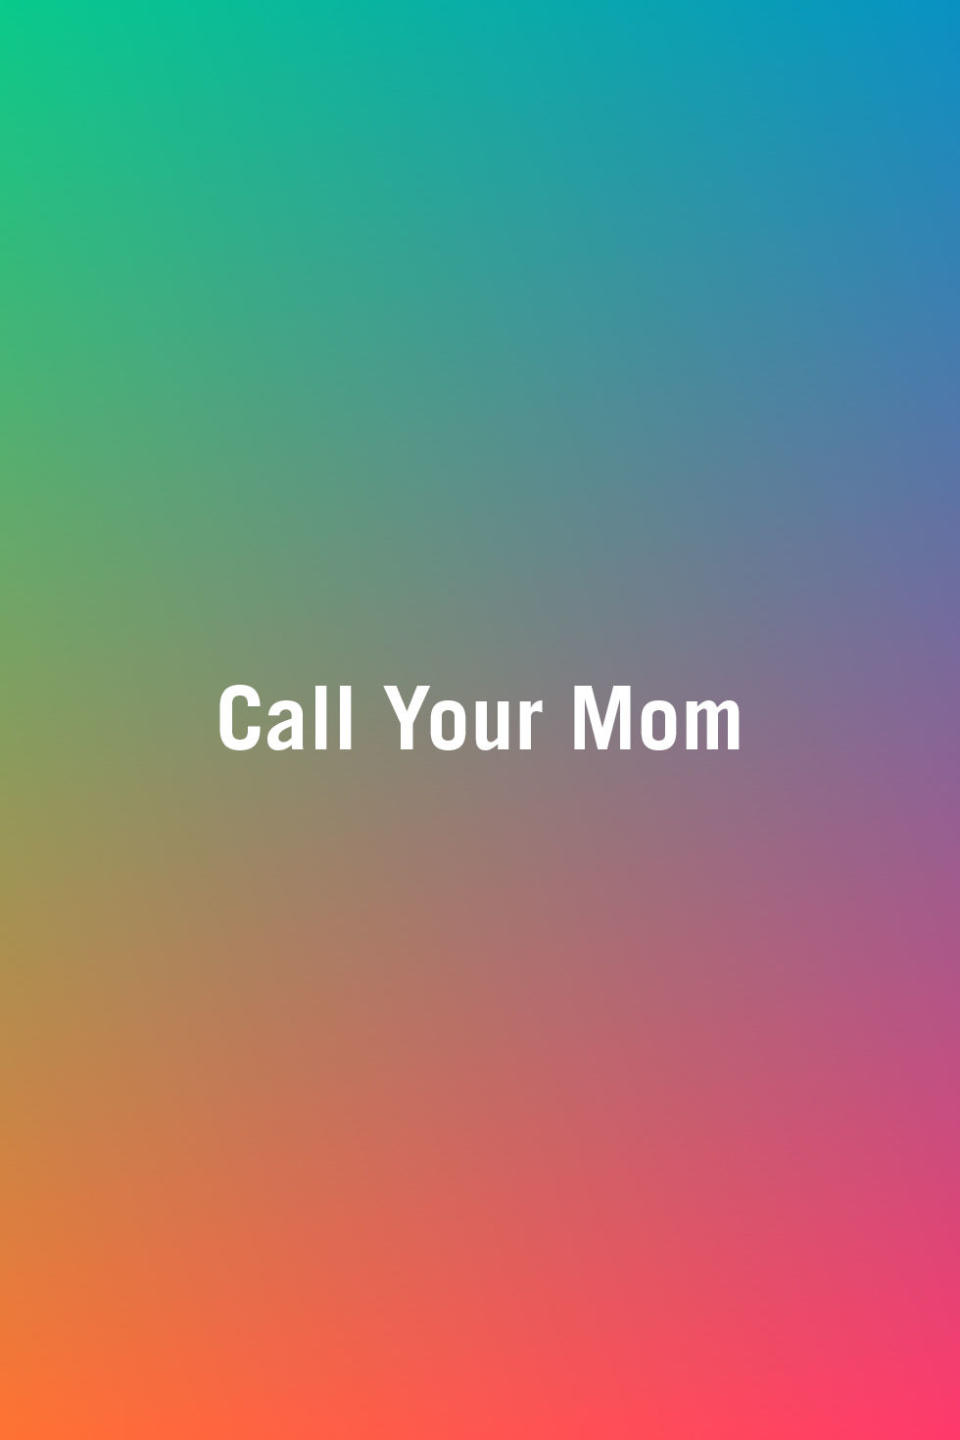 <p>You mom wants to hear from somebody in your household to know everyone is alive, so if you don't call her, then your wife may feel like she has to. And chances are, you're the one who knows your mom best and who she wants to hear from the most.</p>